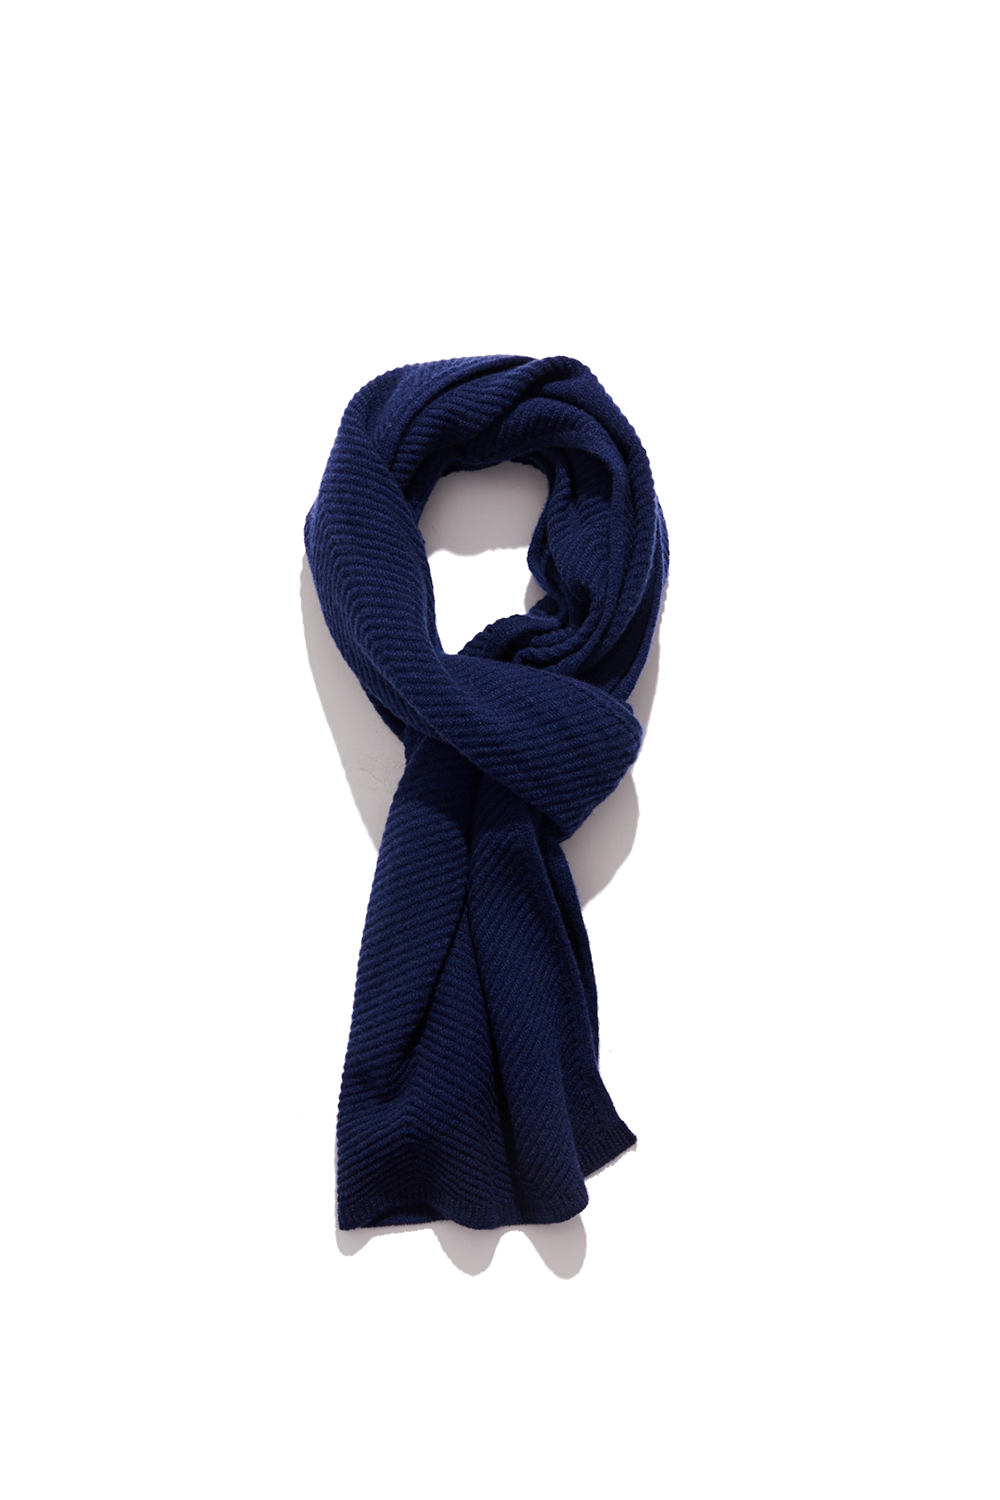 Premium pure cashmere100 whole-garment knitting shawl and scarf - Royal navy